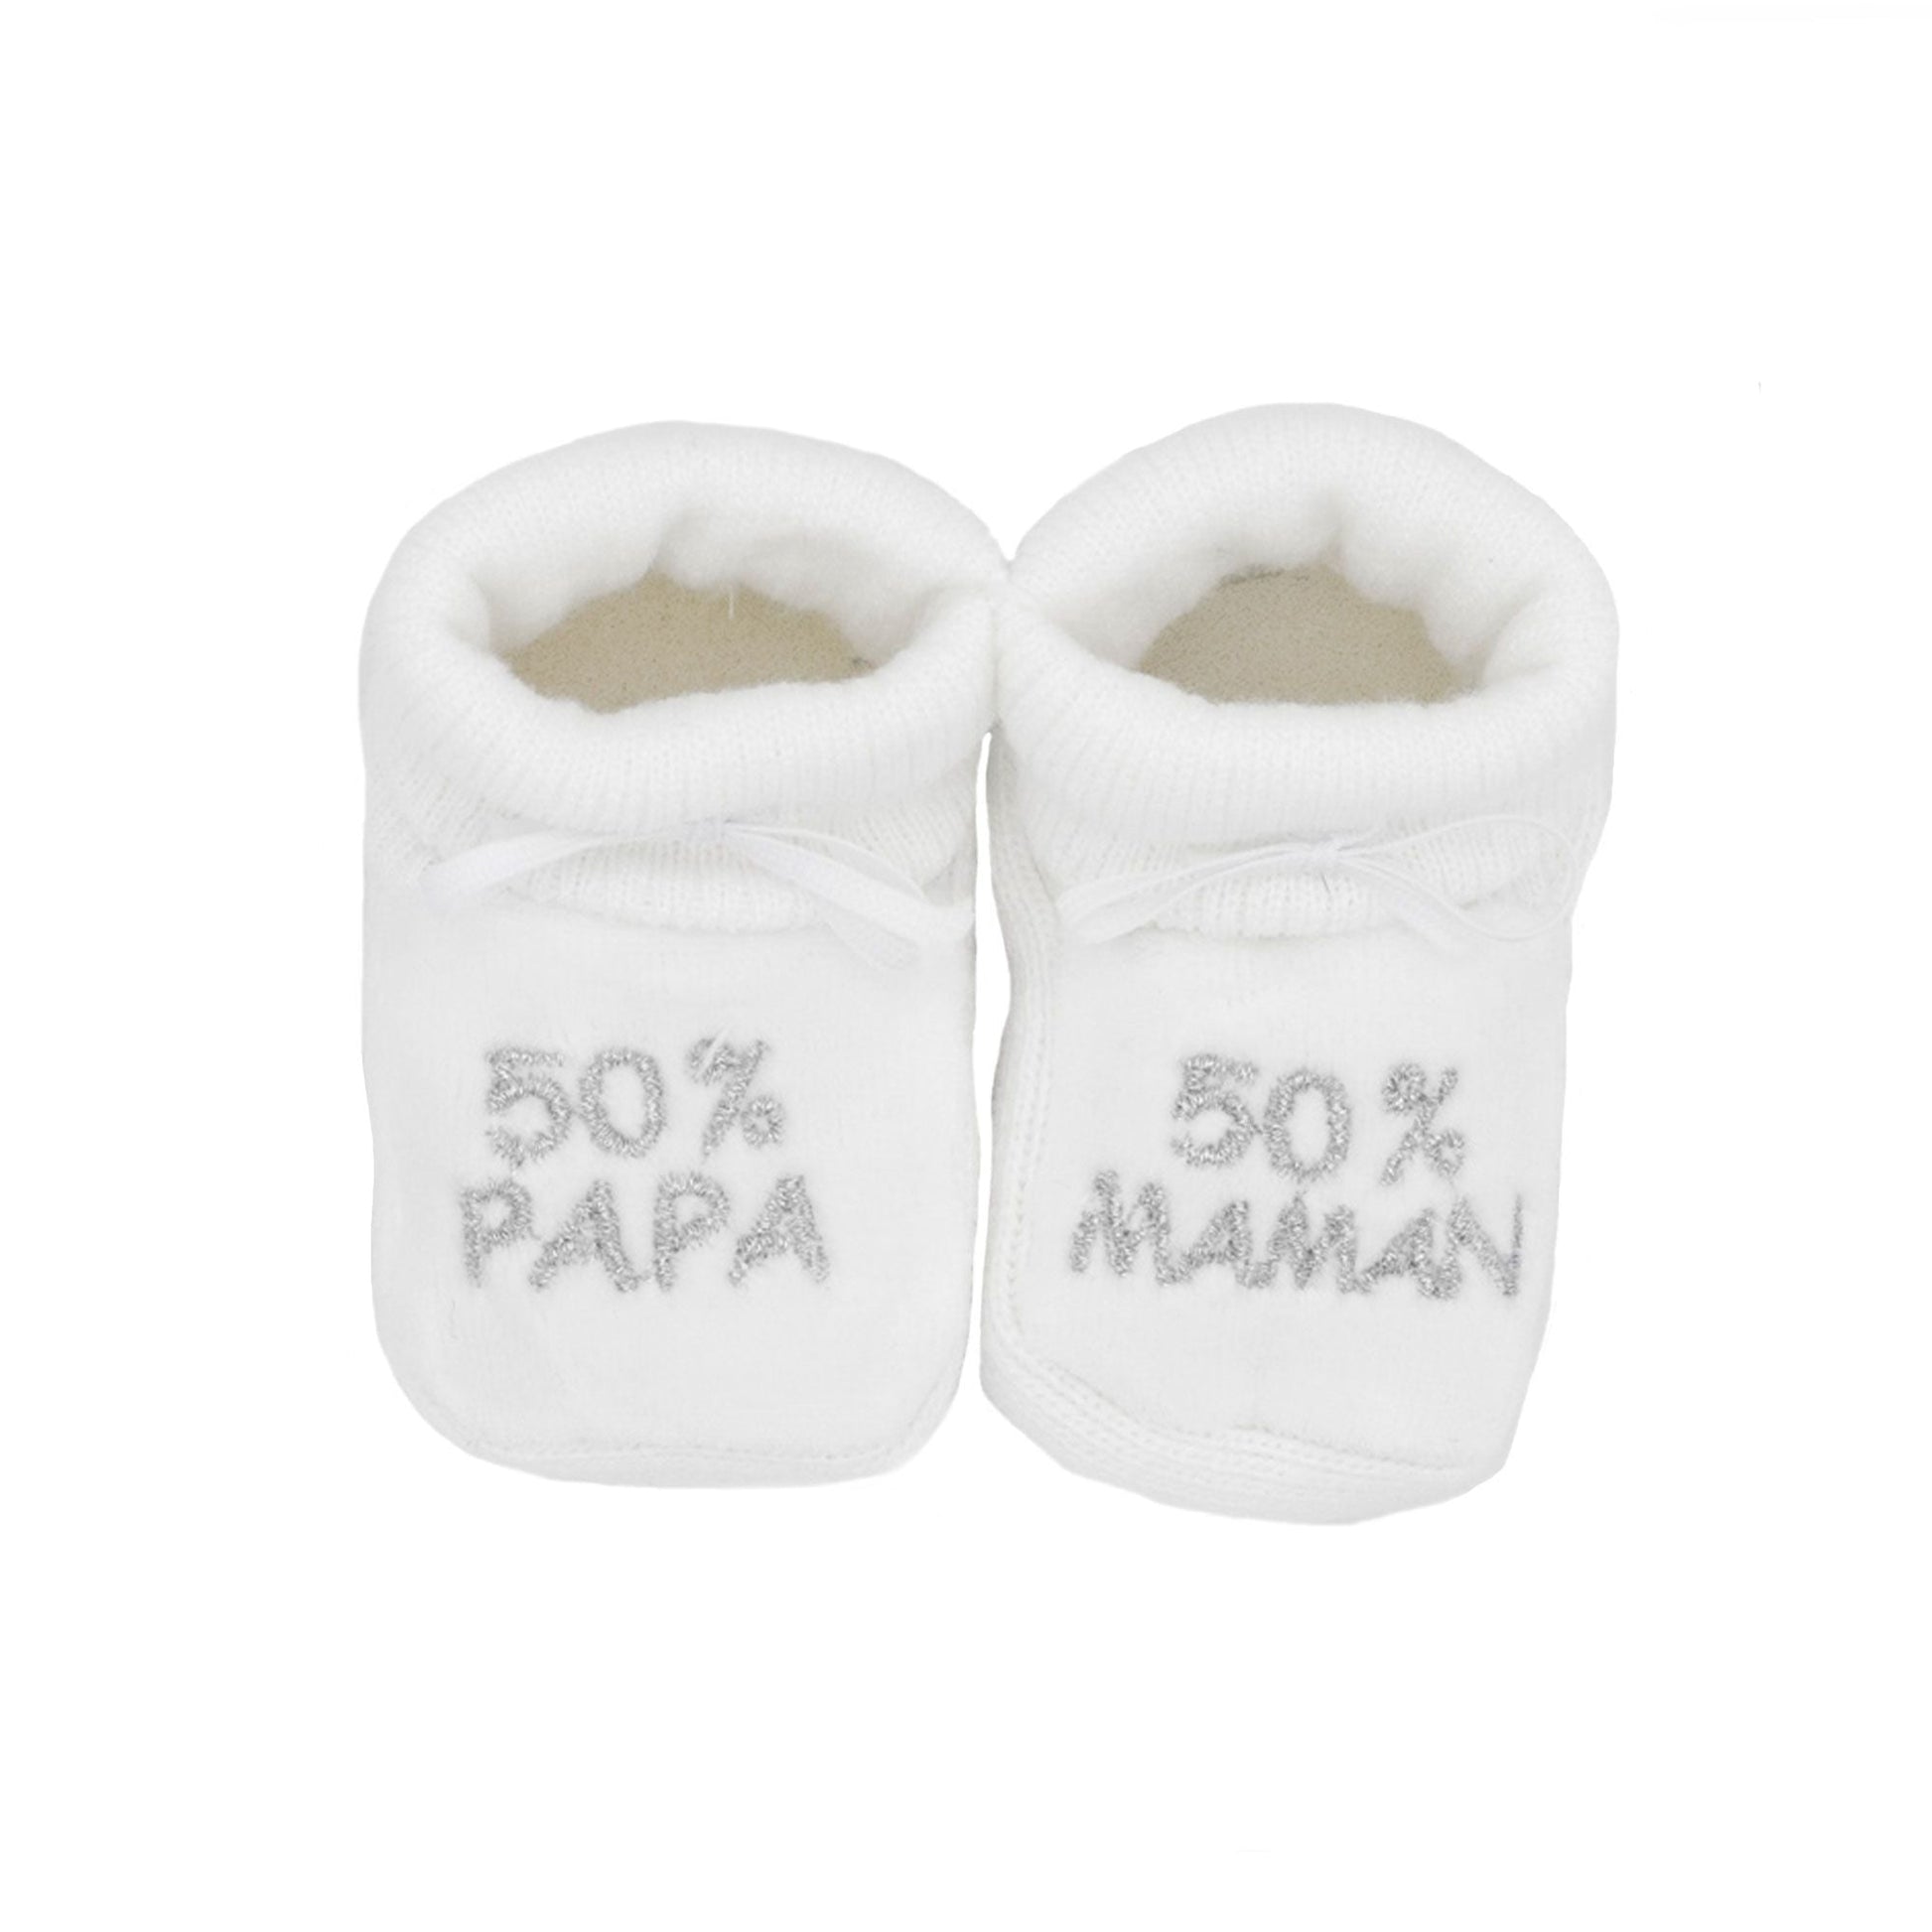 Get trendy with Chaussons Bleu 50% Papa ou Le plus Beau - Chaussons available at BABY PREMA. Grab yours for €4.80 today!